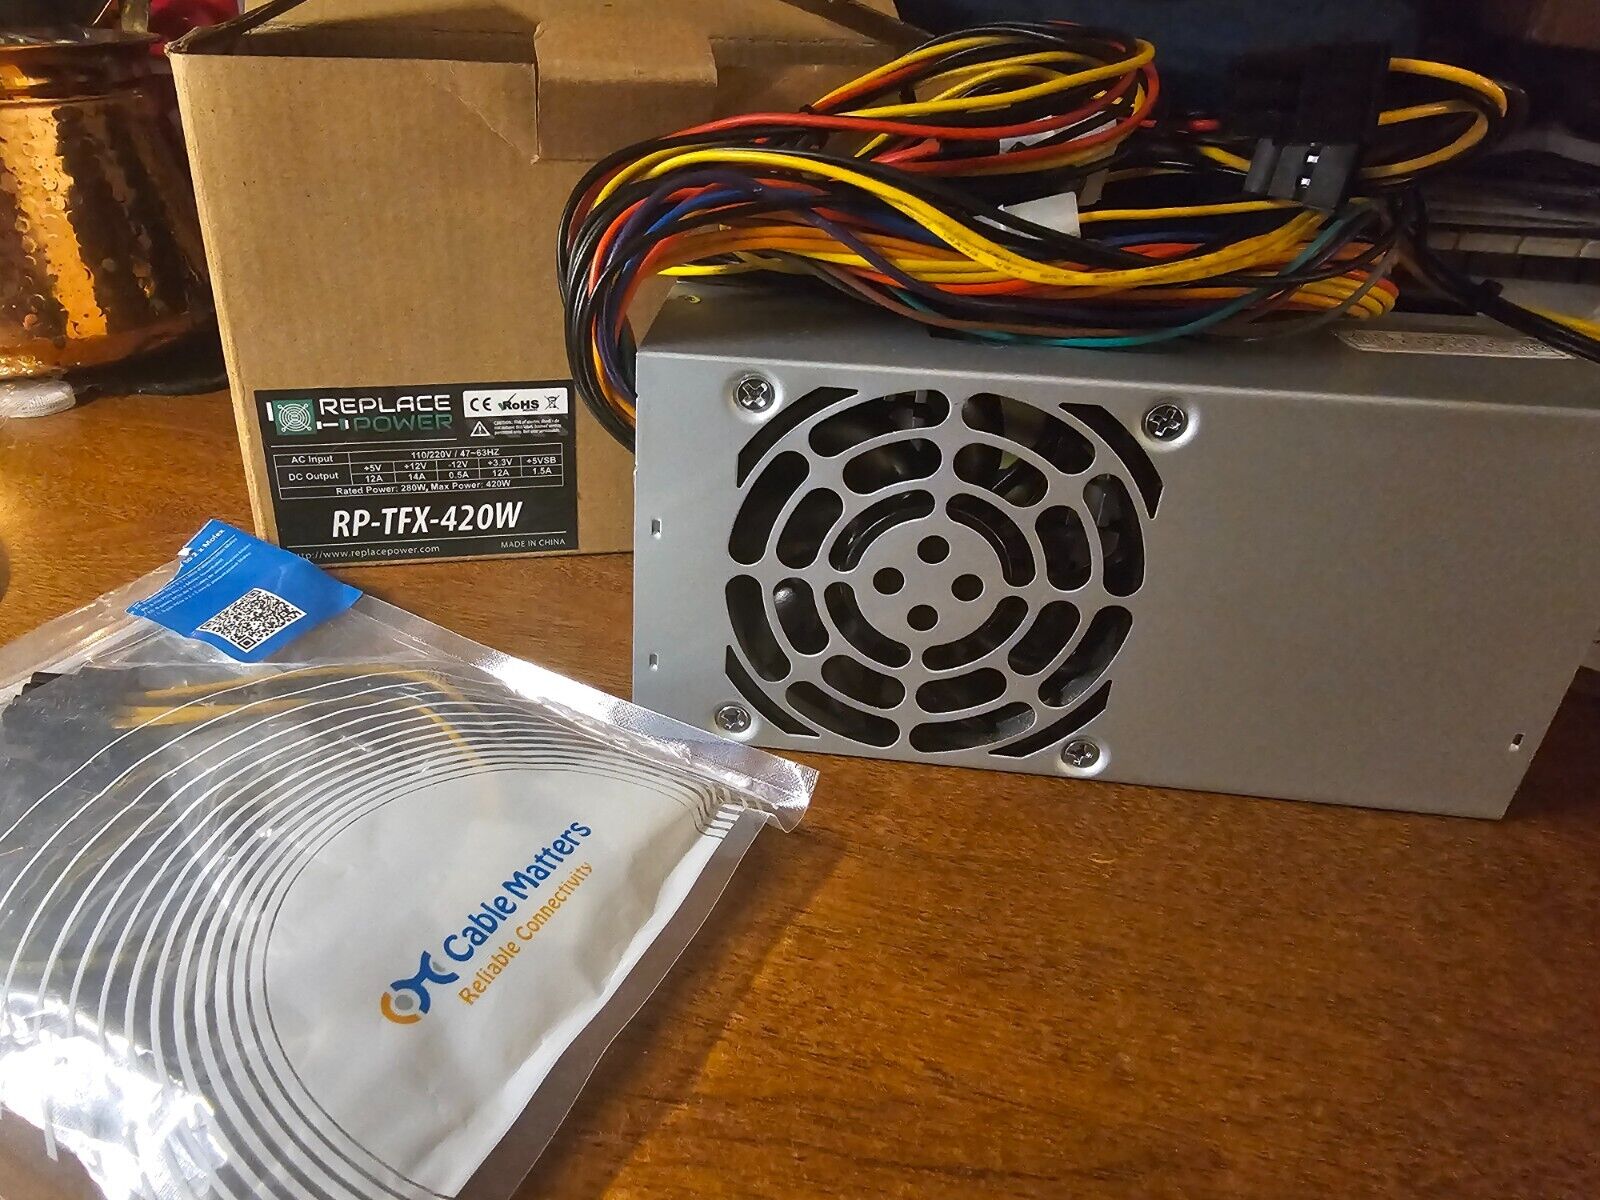 REPLACE POWER RP-TFX-420W POWER SUPPLY UPGRADE - Never Used In Box